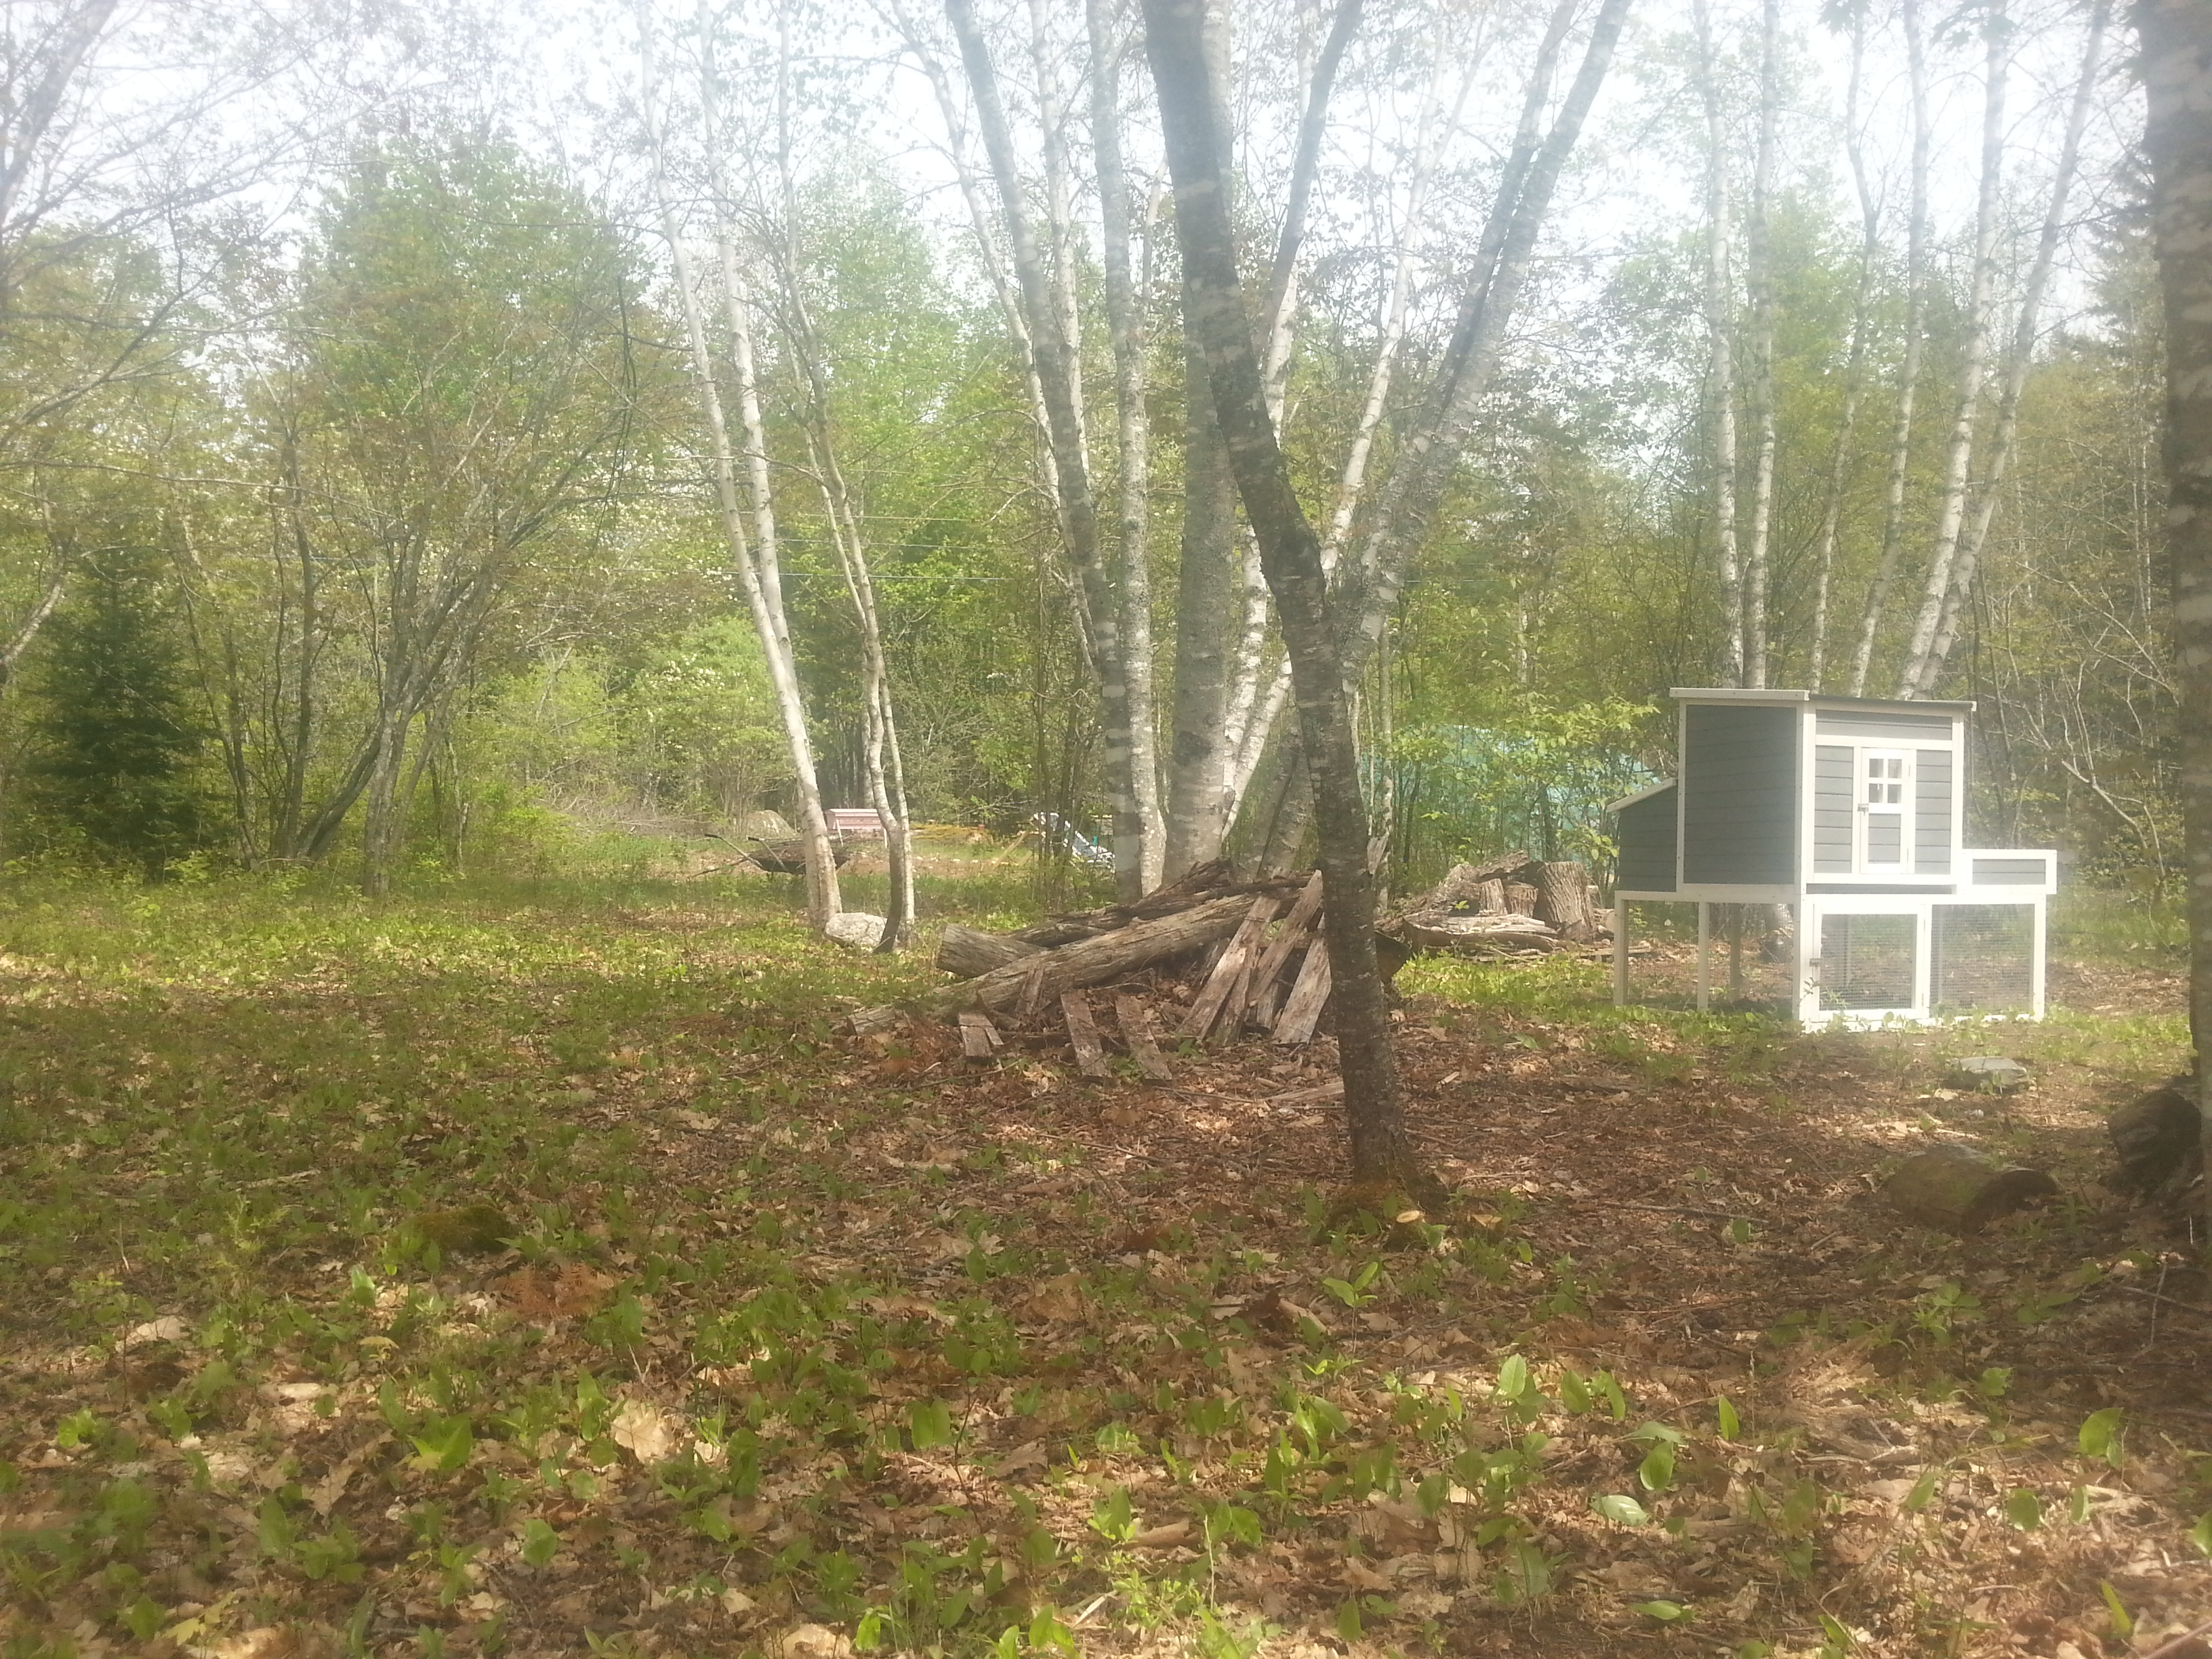 Clearing the trees, making room for our little dream farm!